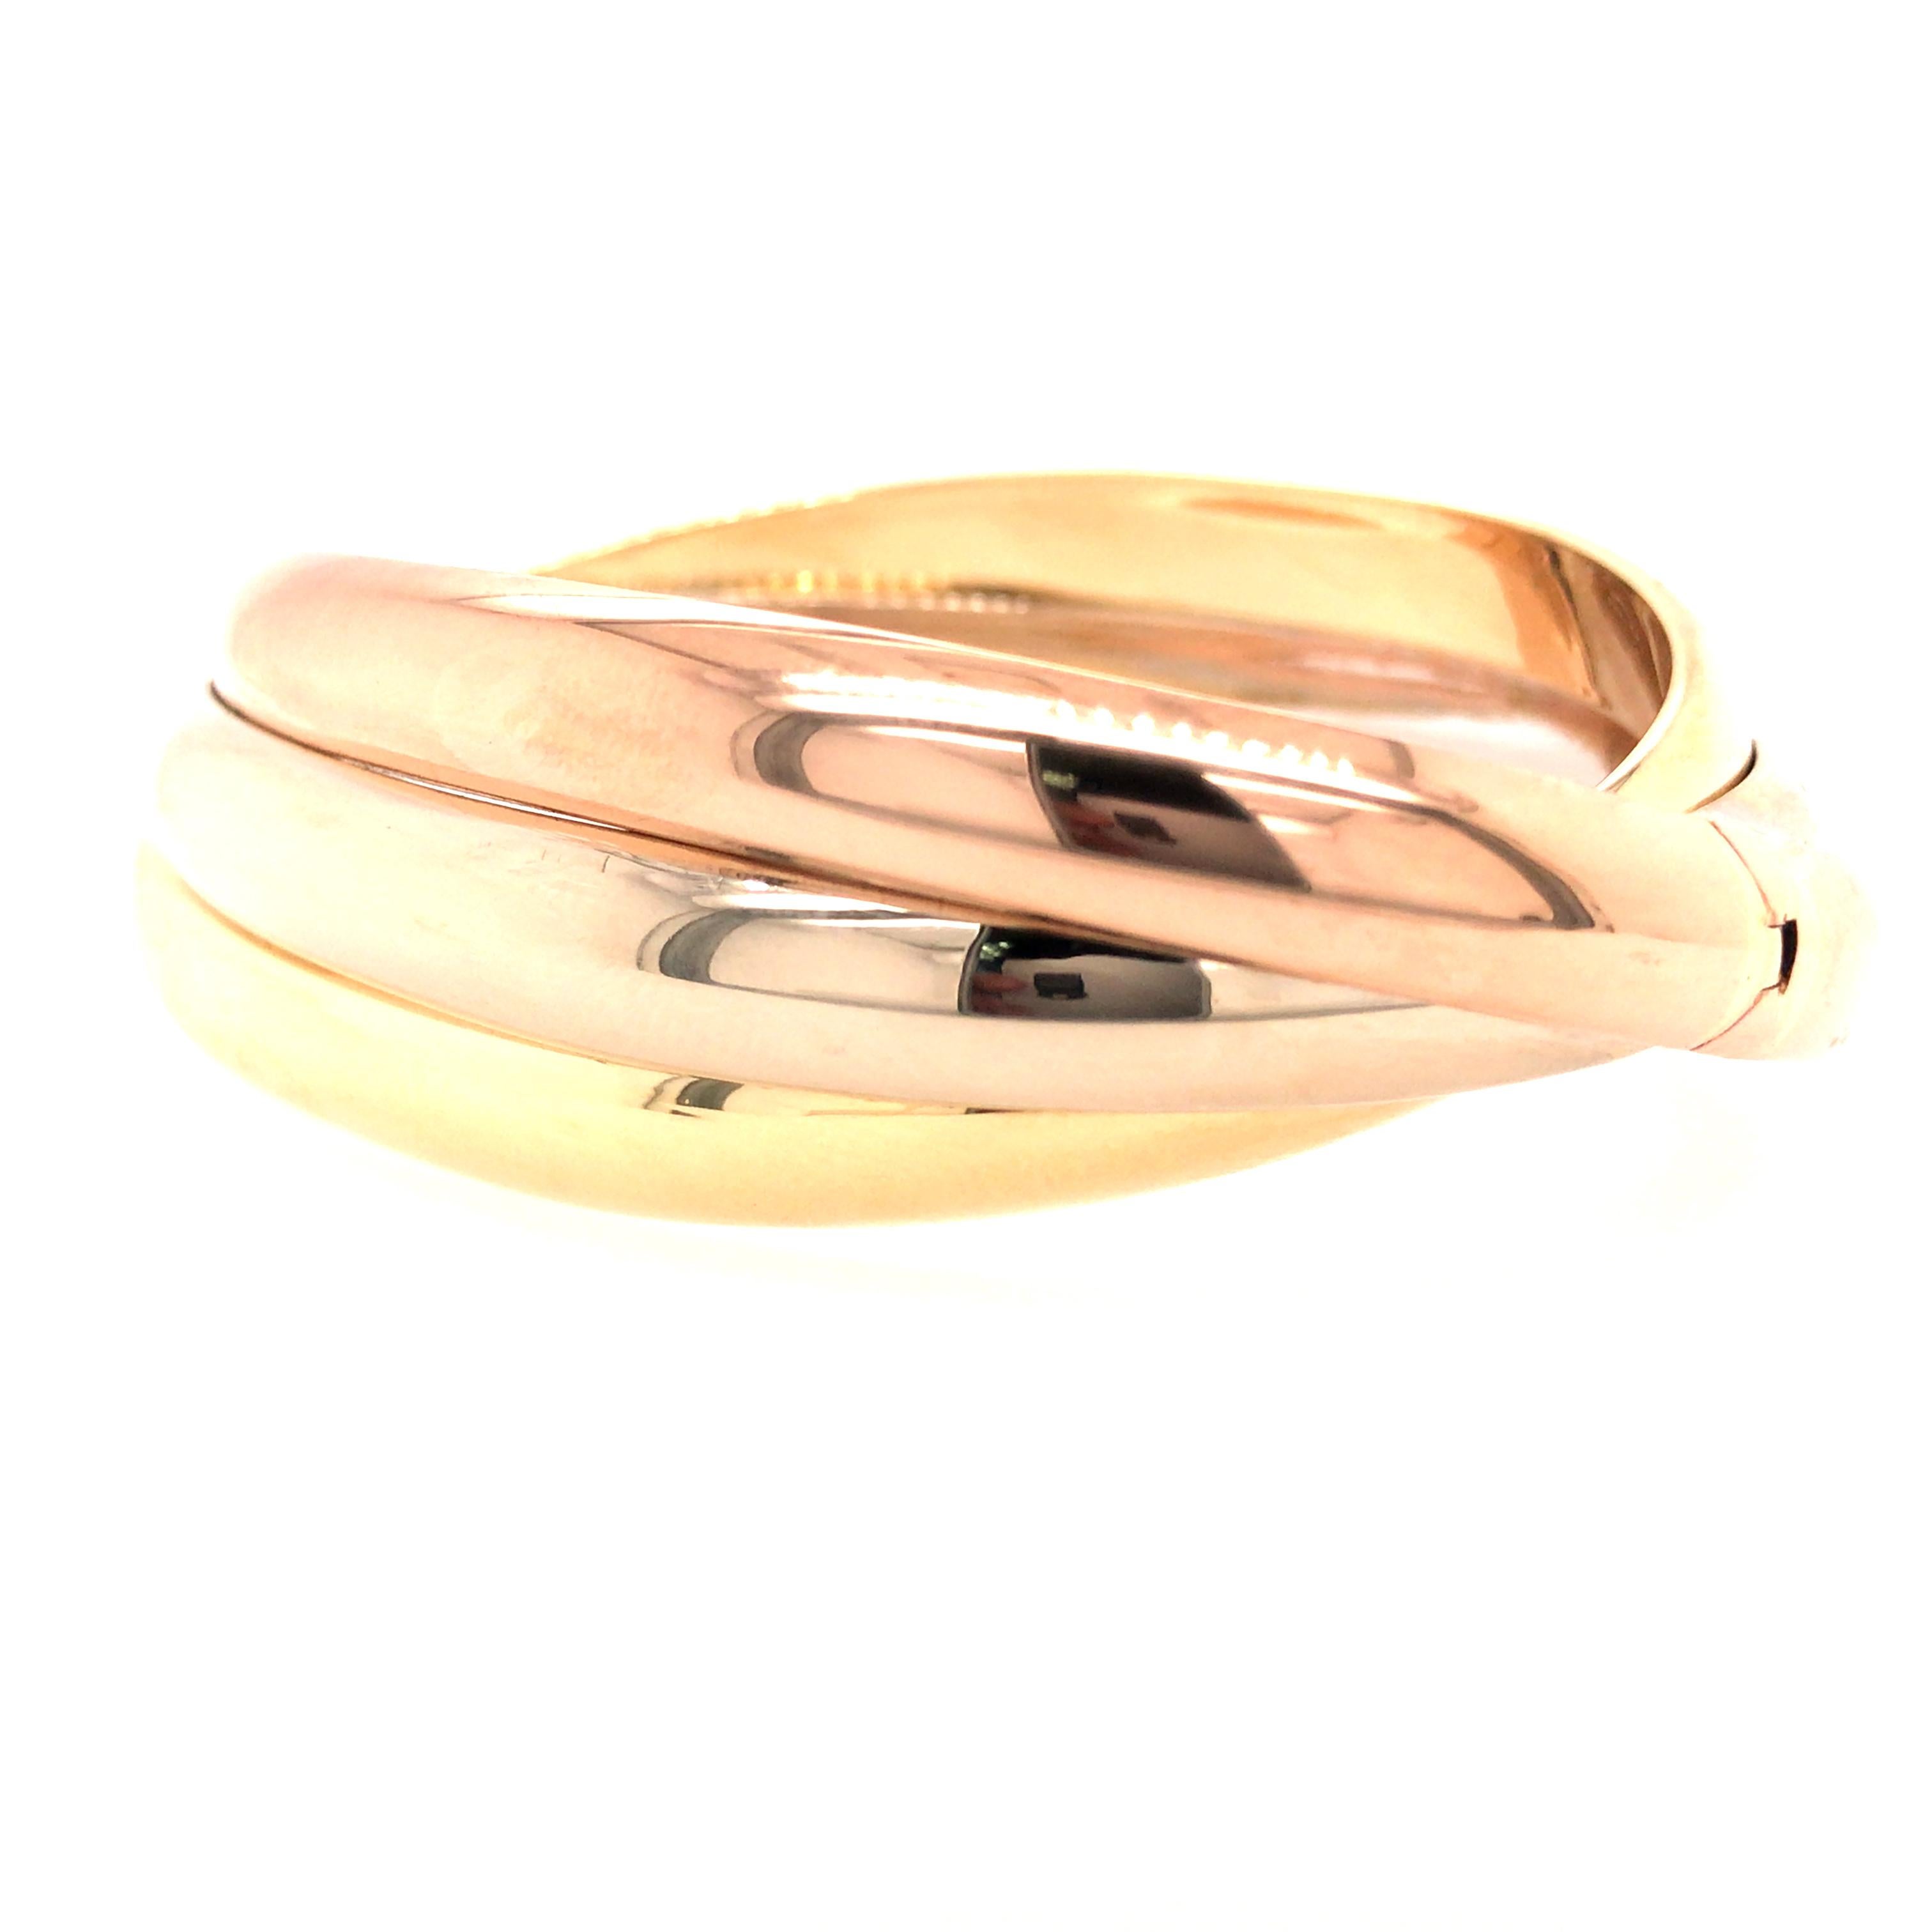 18K Tri-Color Gold Twist Bangle.  The Bangle measures 6 1/2 inch inner circumference and 7/8 inch in width.  Hinged opening.  54.42 grams.